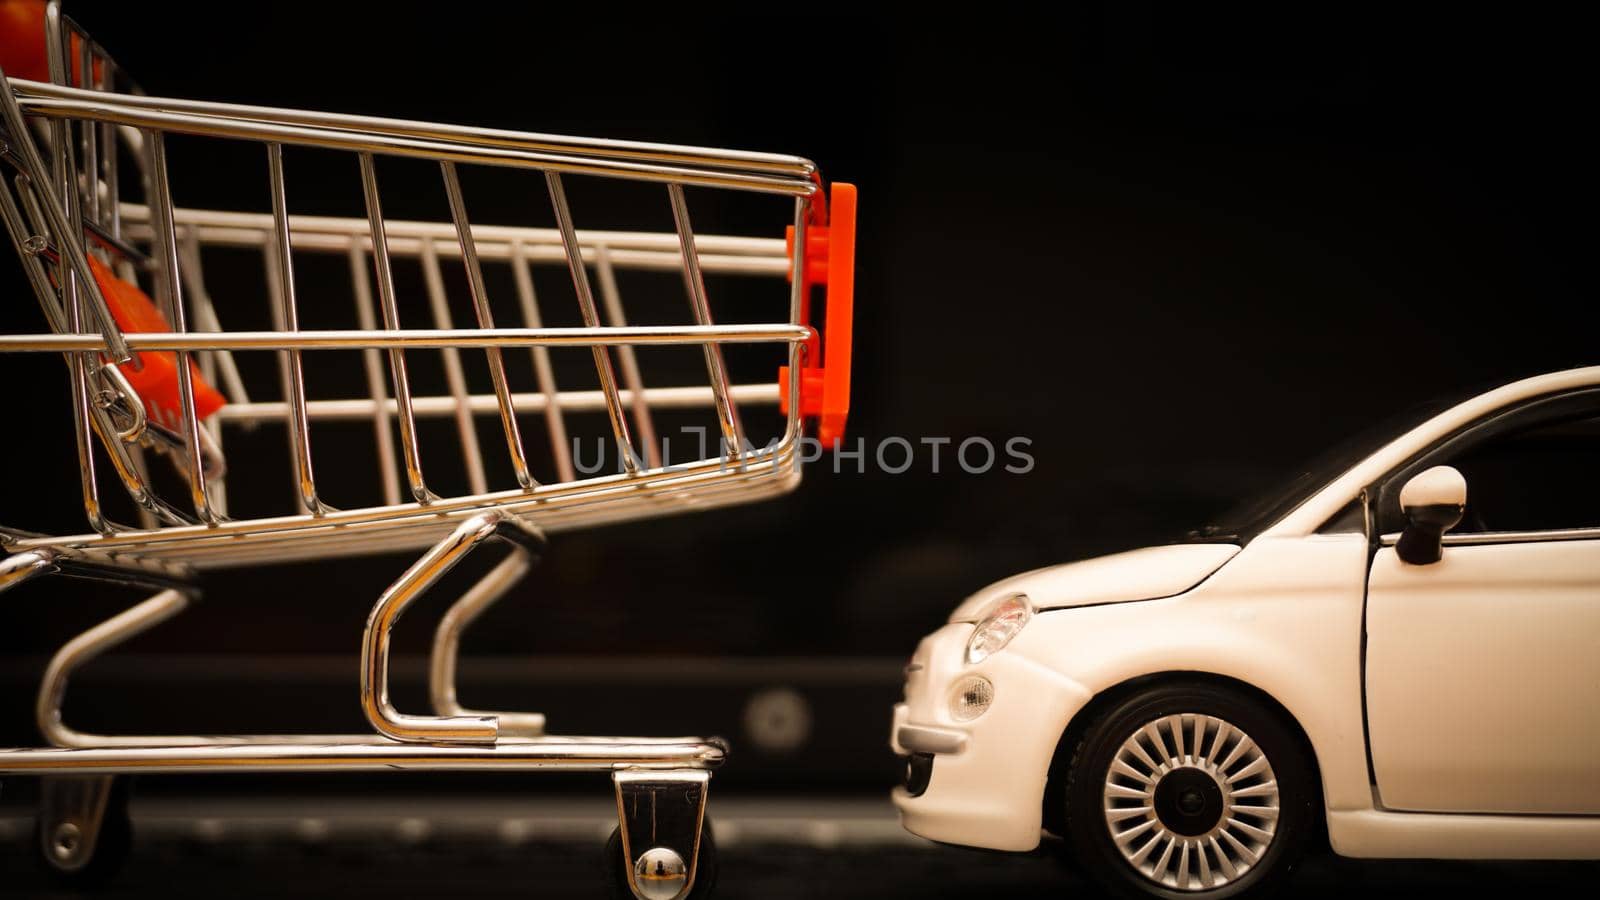 Online car shopping and delivery illustration concept shot